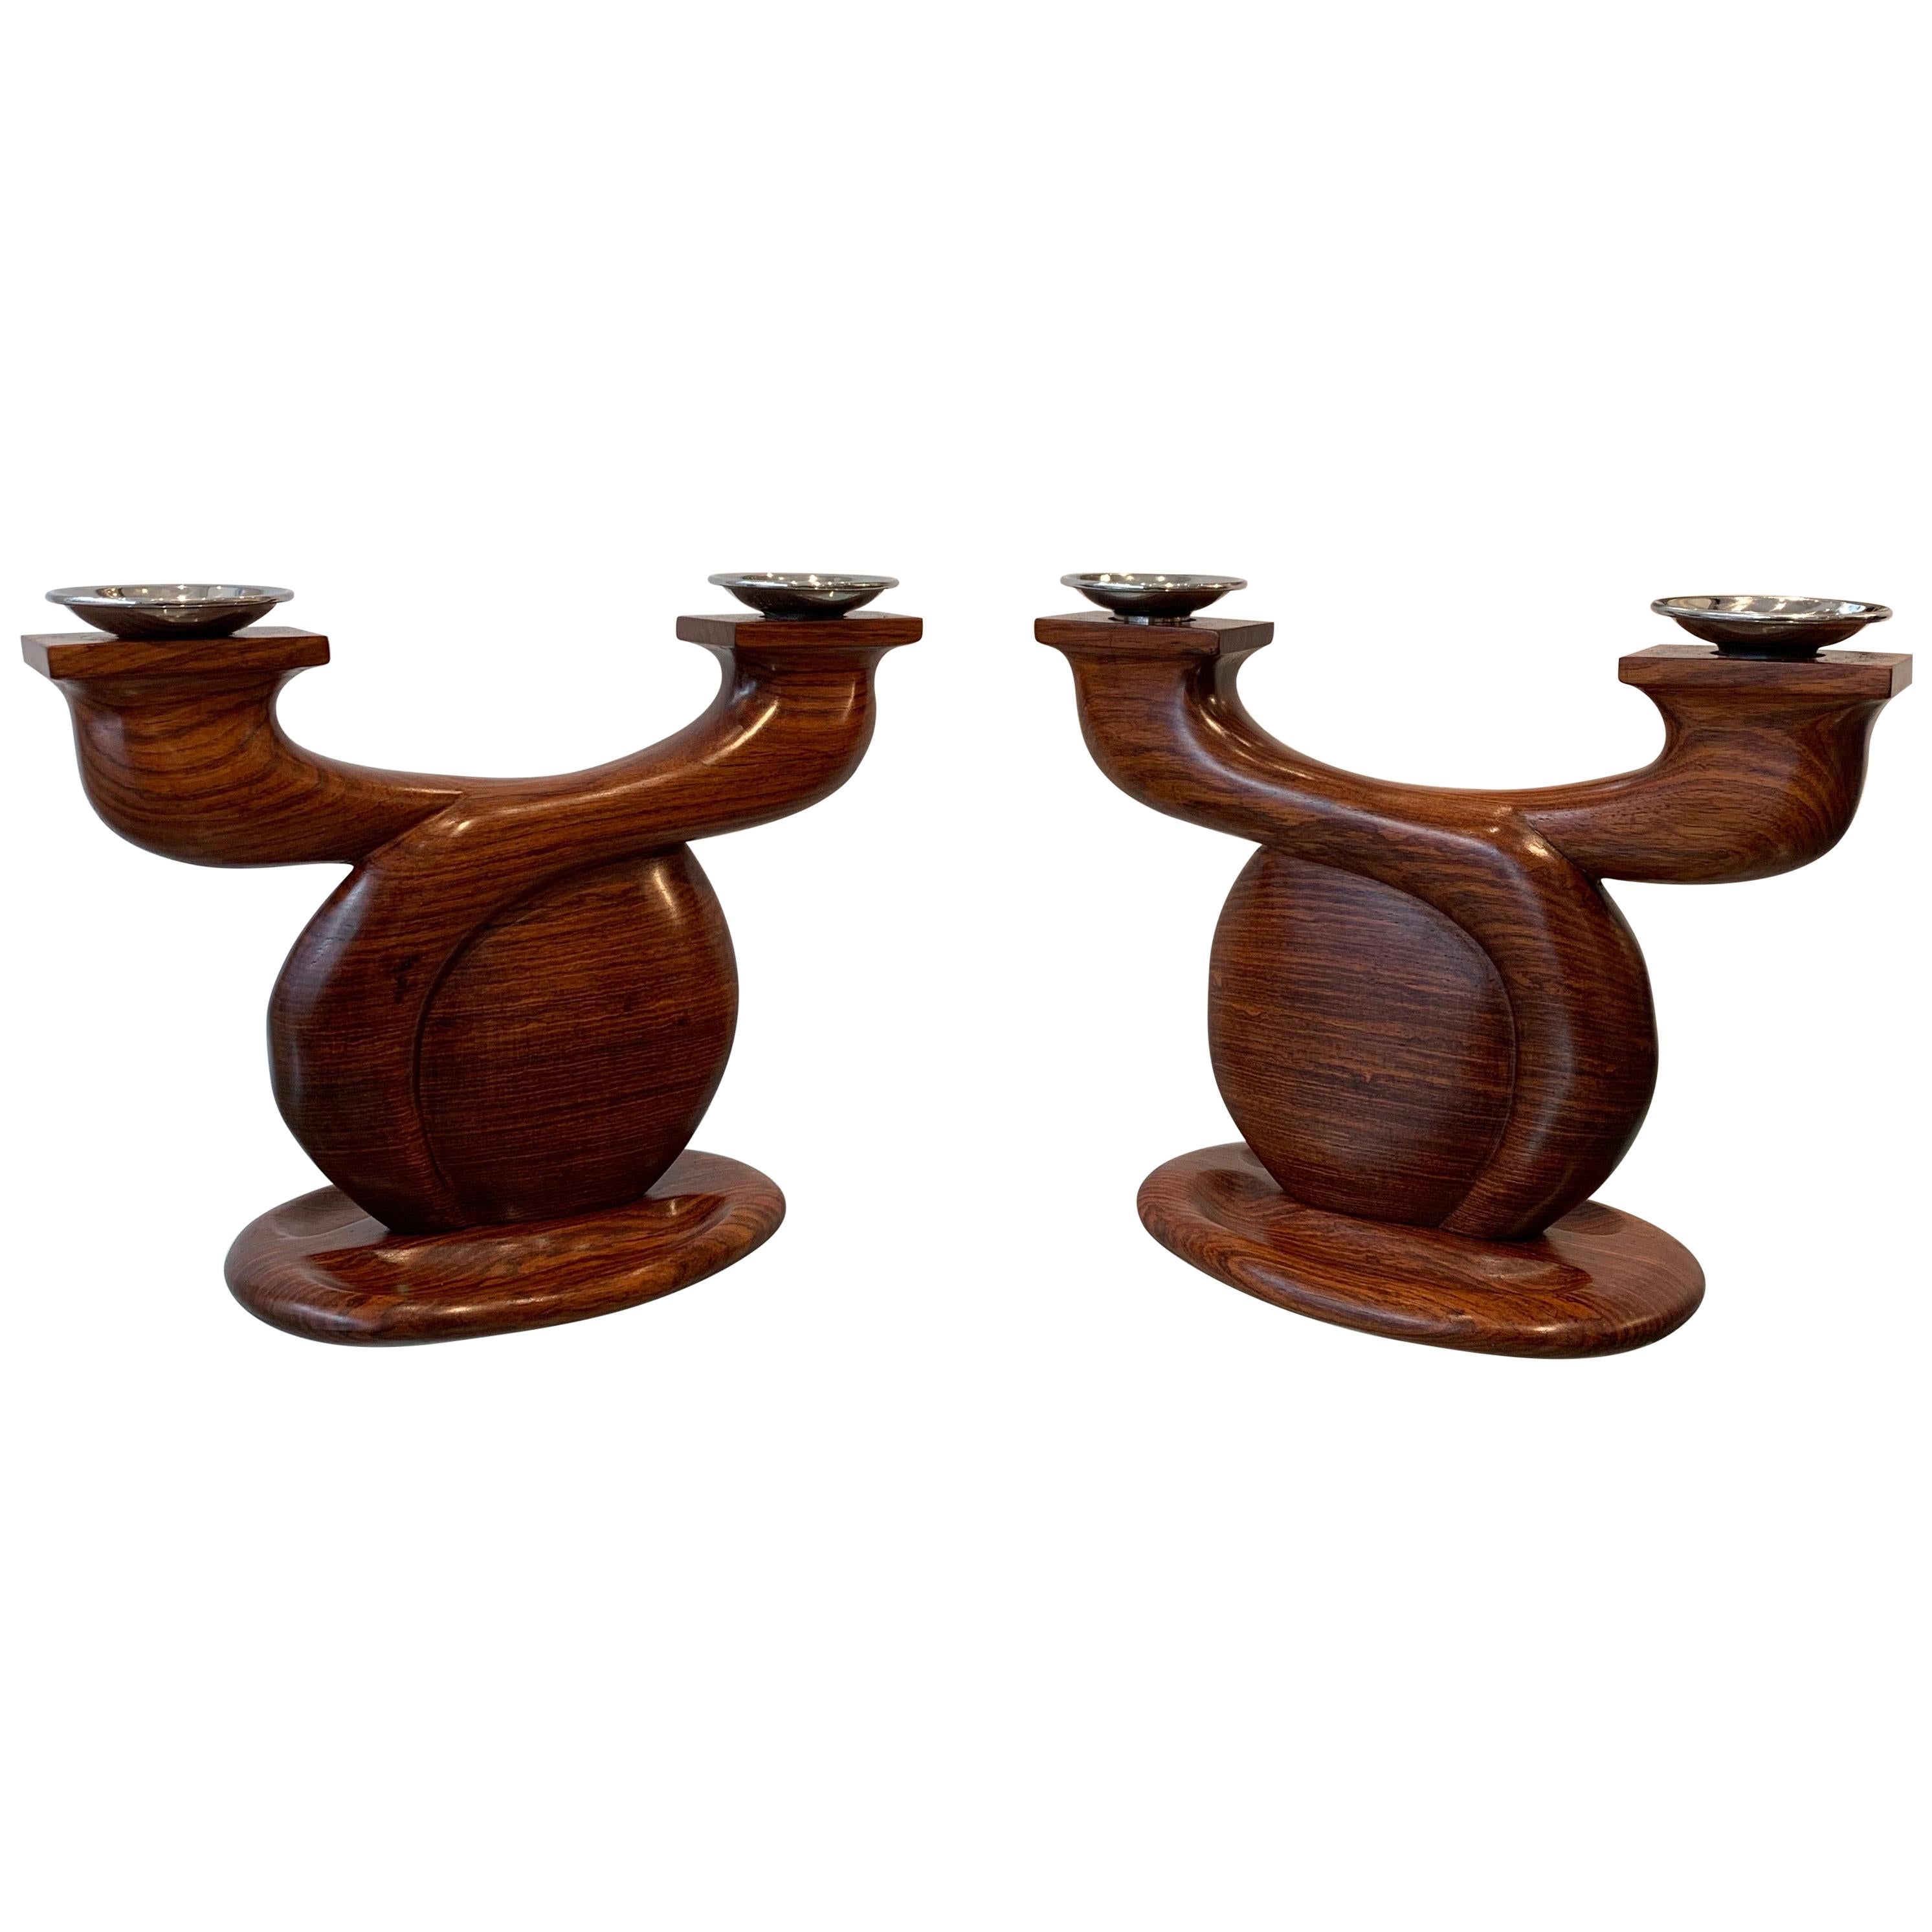 Louis Prodhon Pair of Candleholders, 1930s